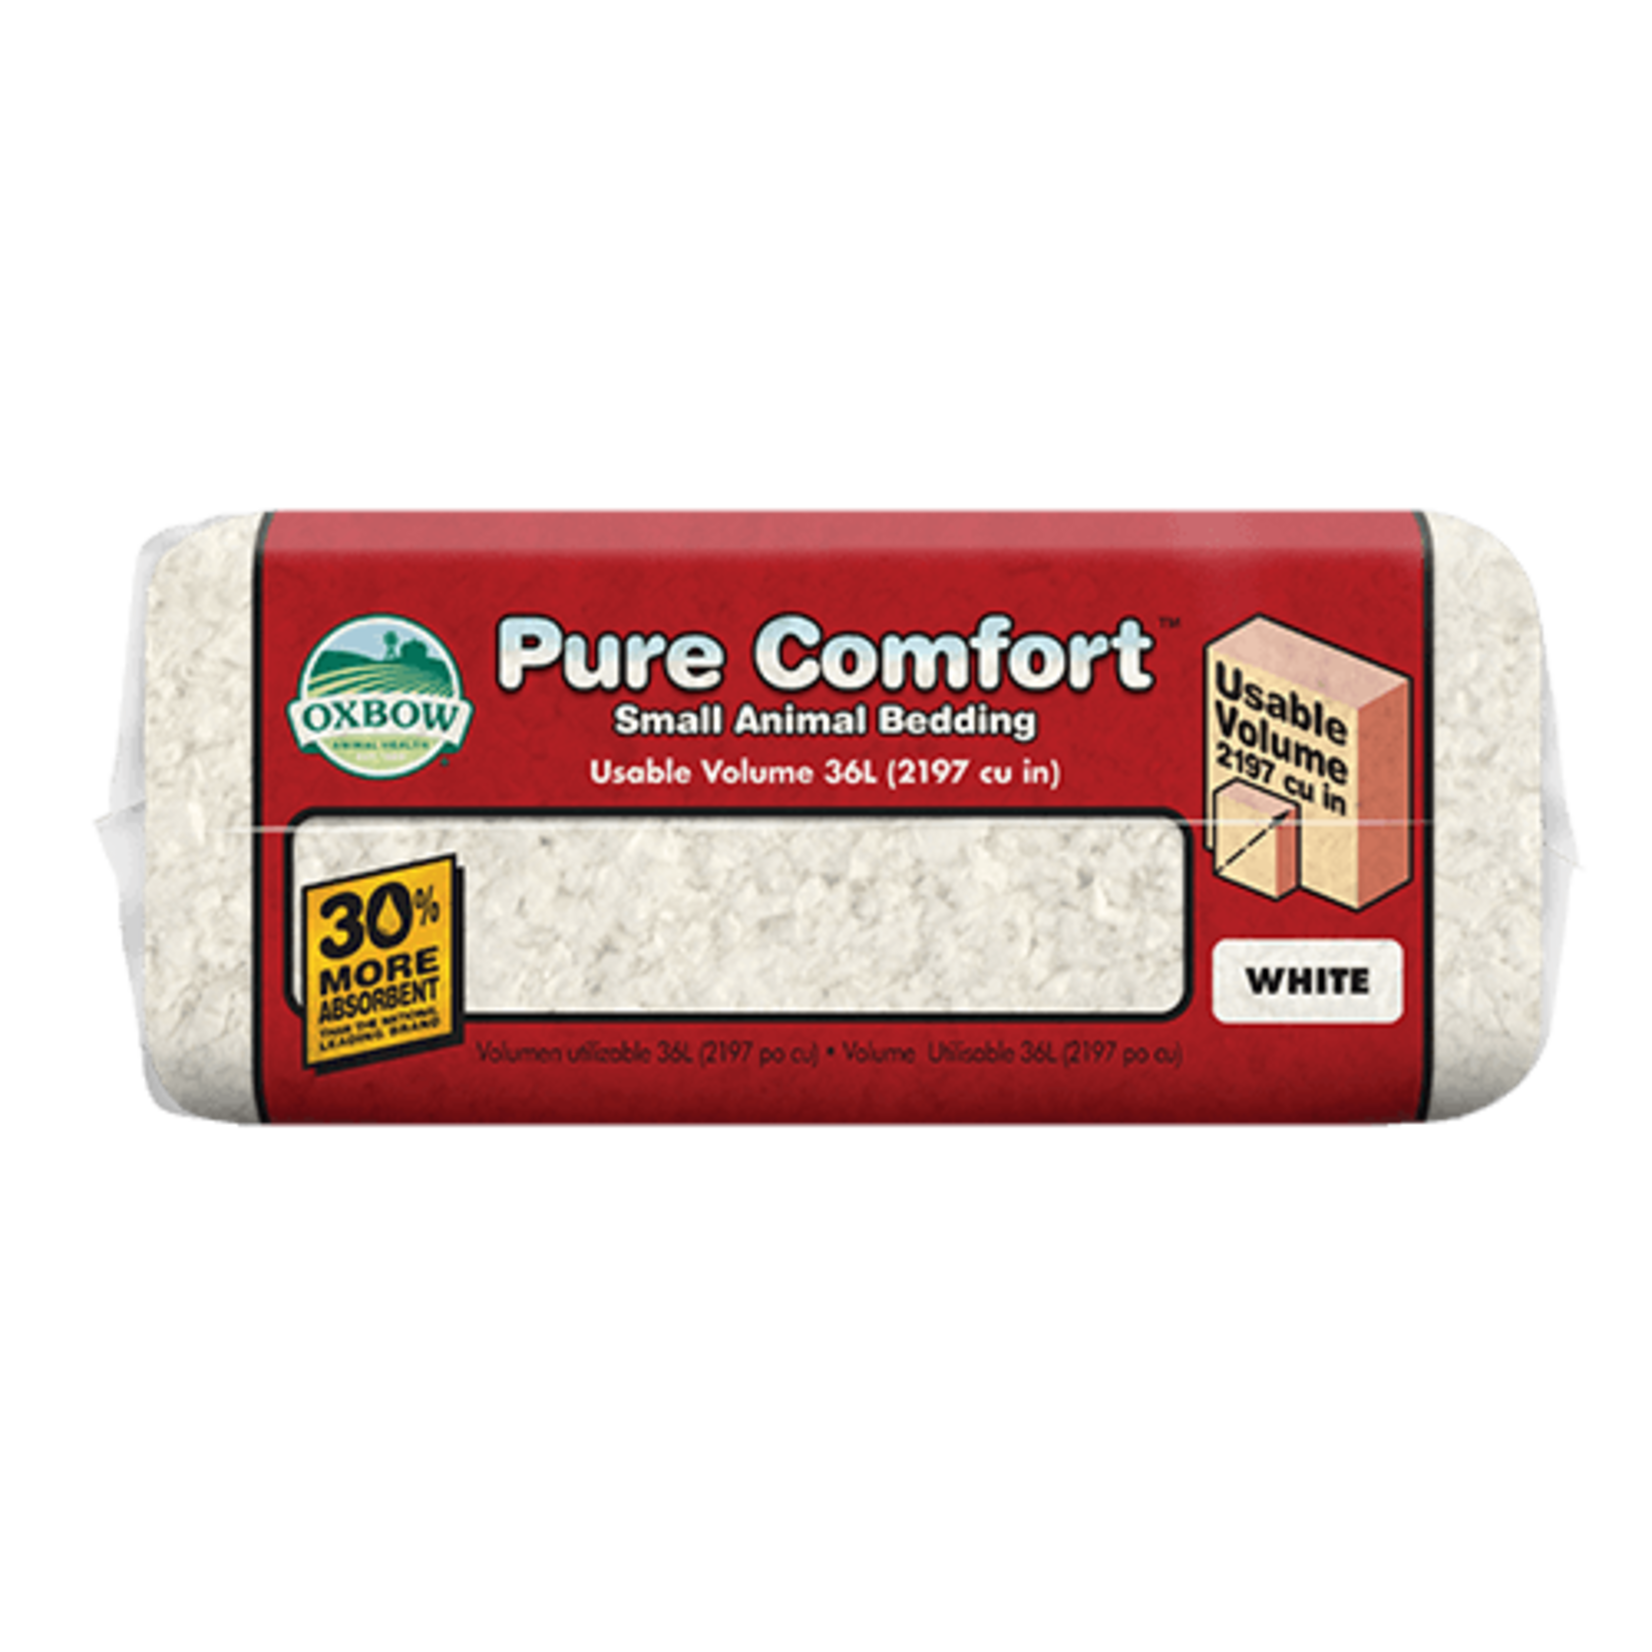 OXBOW Oxbow Pure Comfort - White Small Animal Bedding 72L